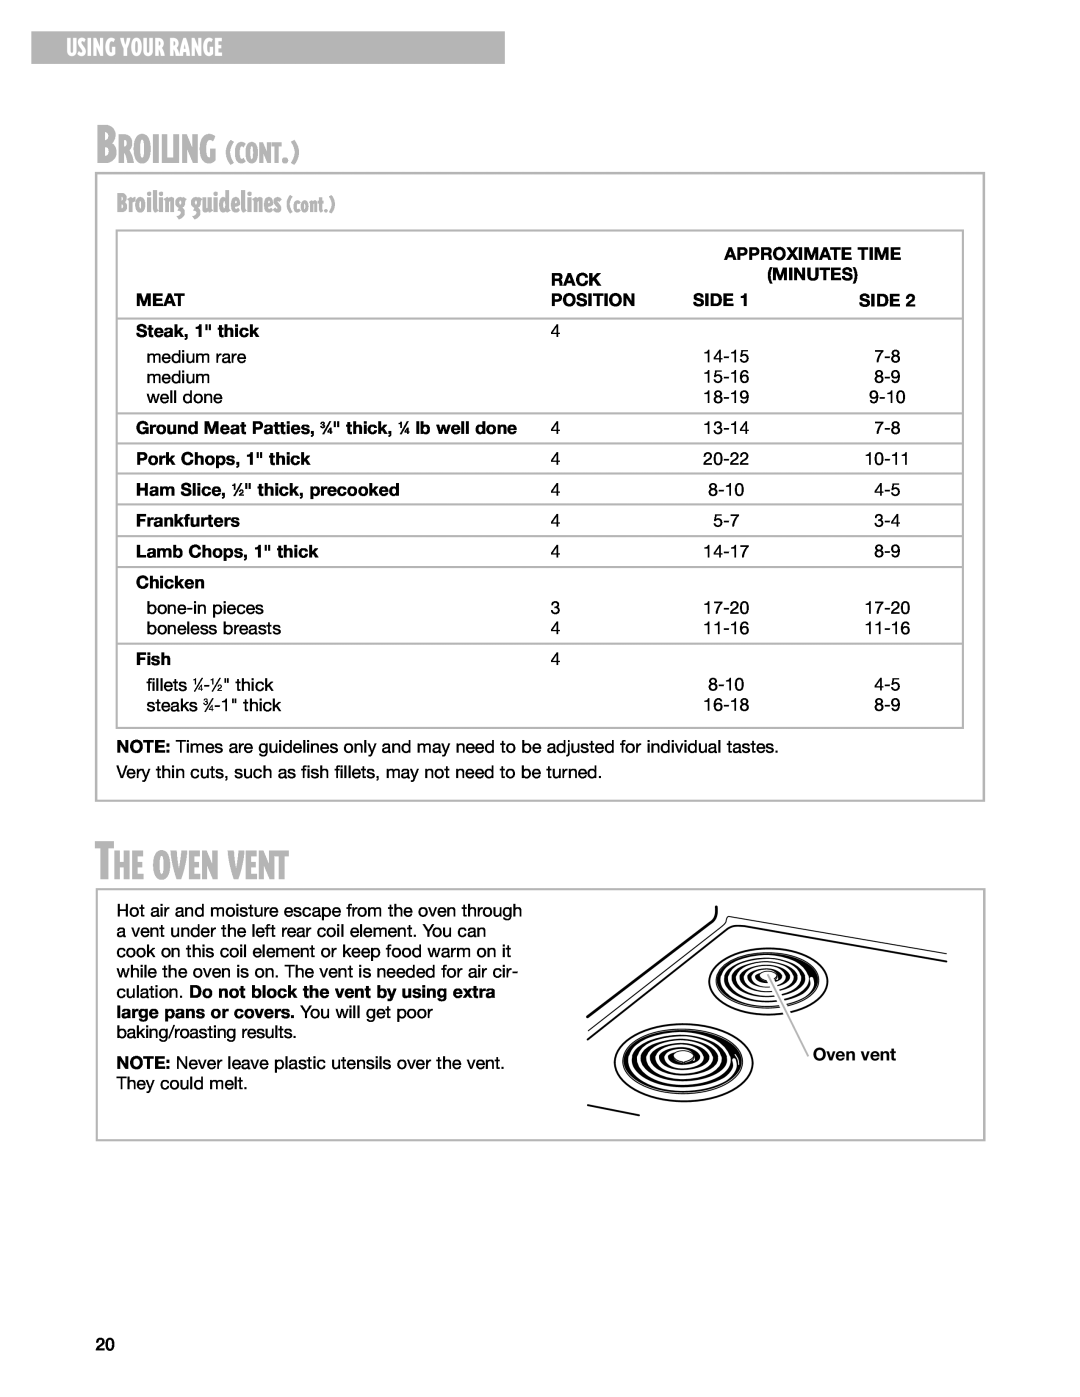 Whirlpool RF325PXG The Oven Vent, Broiling guidelines cont, Broiling Cont, Using Your Range, Approximate Time, Rack, Side 